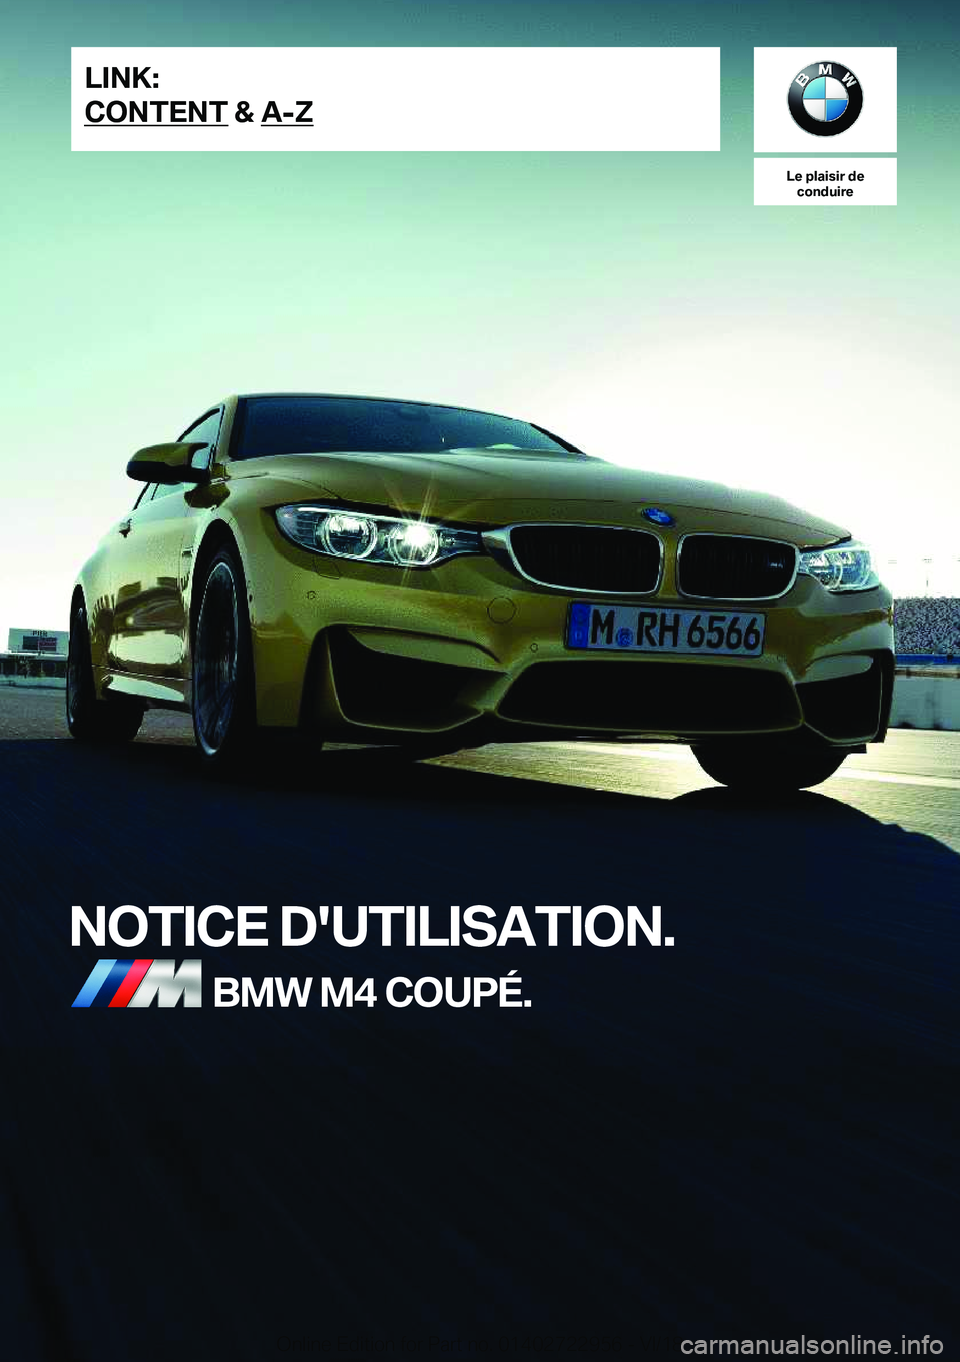 BMW M4 2019  Notices Demploi (in French) �L�e��p�l�a�i�s�i�r��d�e�c�o�n�d�u�i�r�e
�N�O�T�I�C�E��D�'�U�T�I�L�I�S�A�T�I�O�N�.�B�M�W��M�4��C�O�U�P�É�.�L�I�N�K�:
�C�O�N�T�E�N�T��&��A�-�;�O�n�l�i�n�e��E�d�i�t�i�o�n��f�o�r��P�a�r�t�